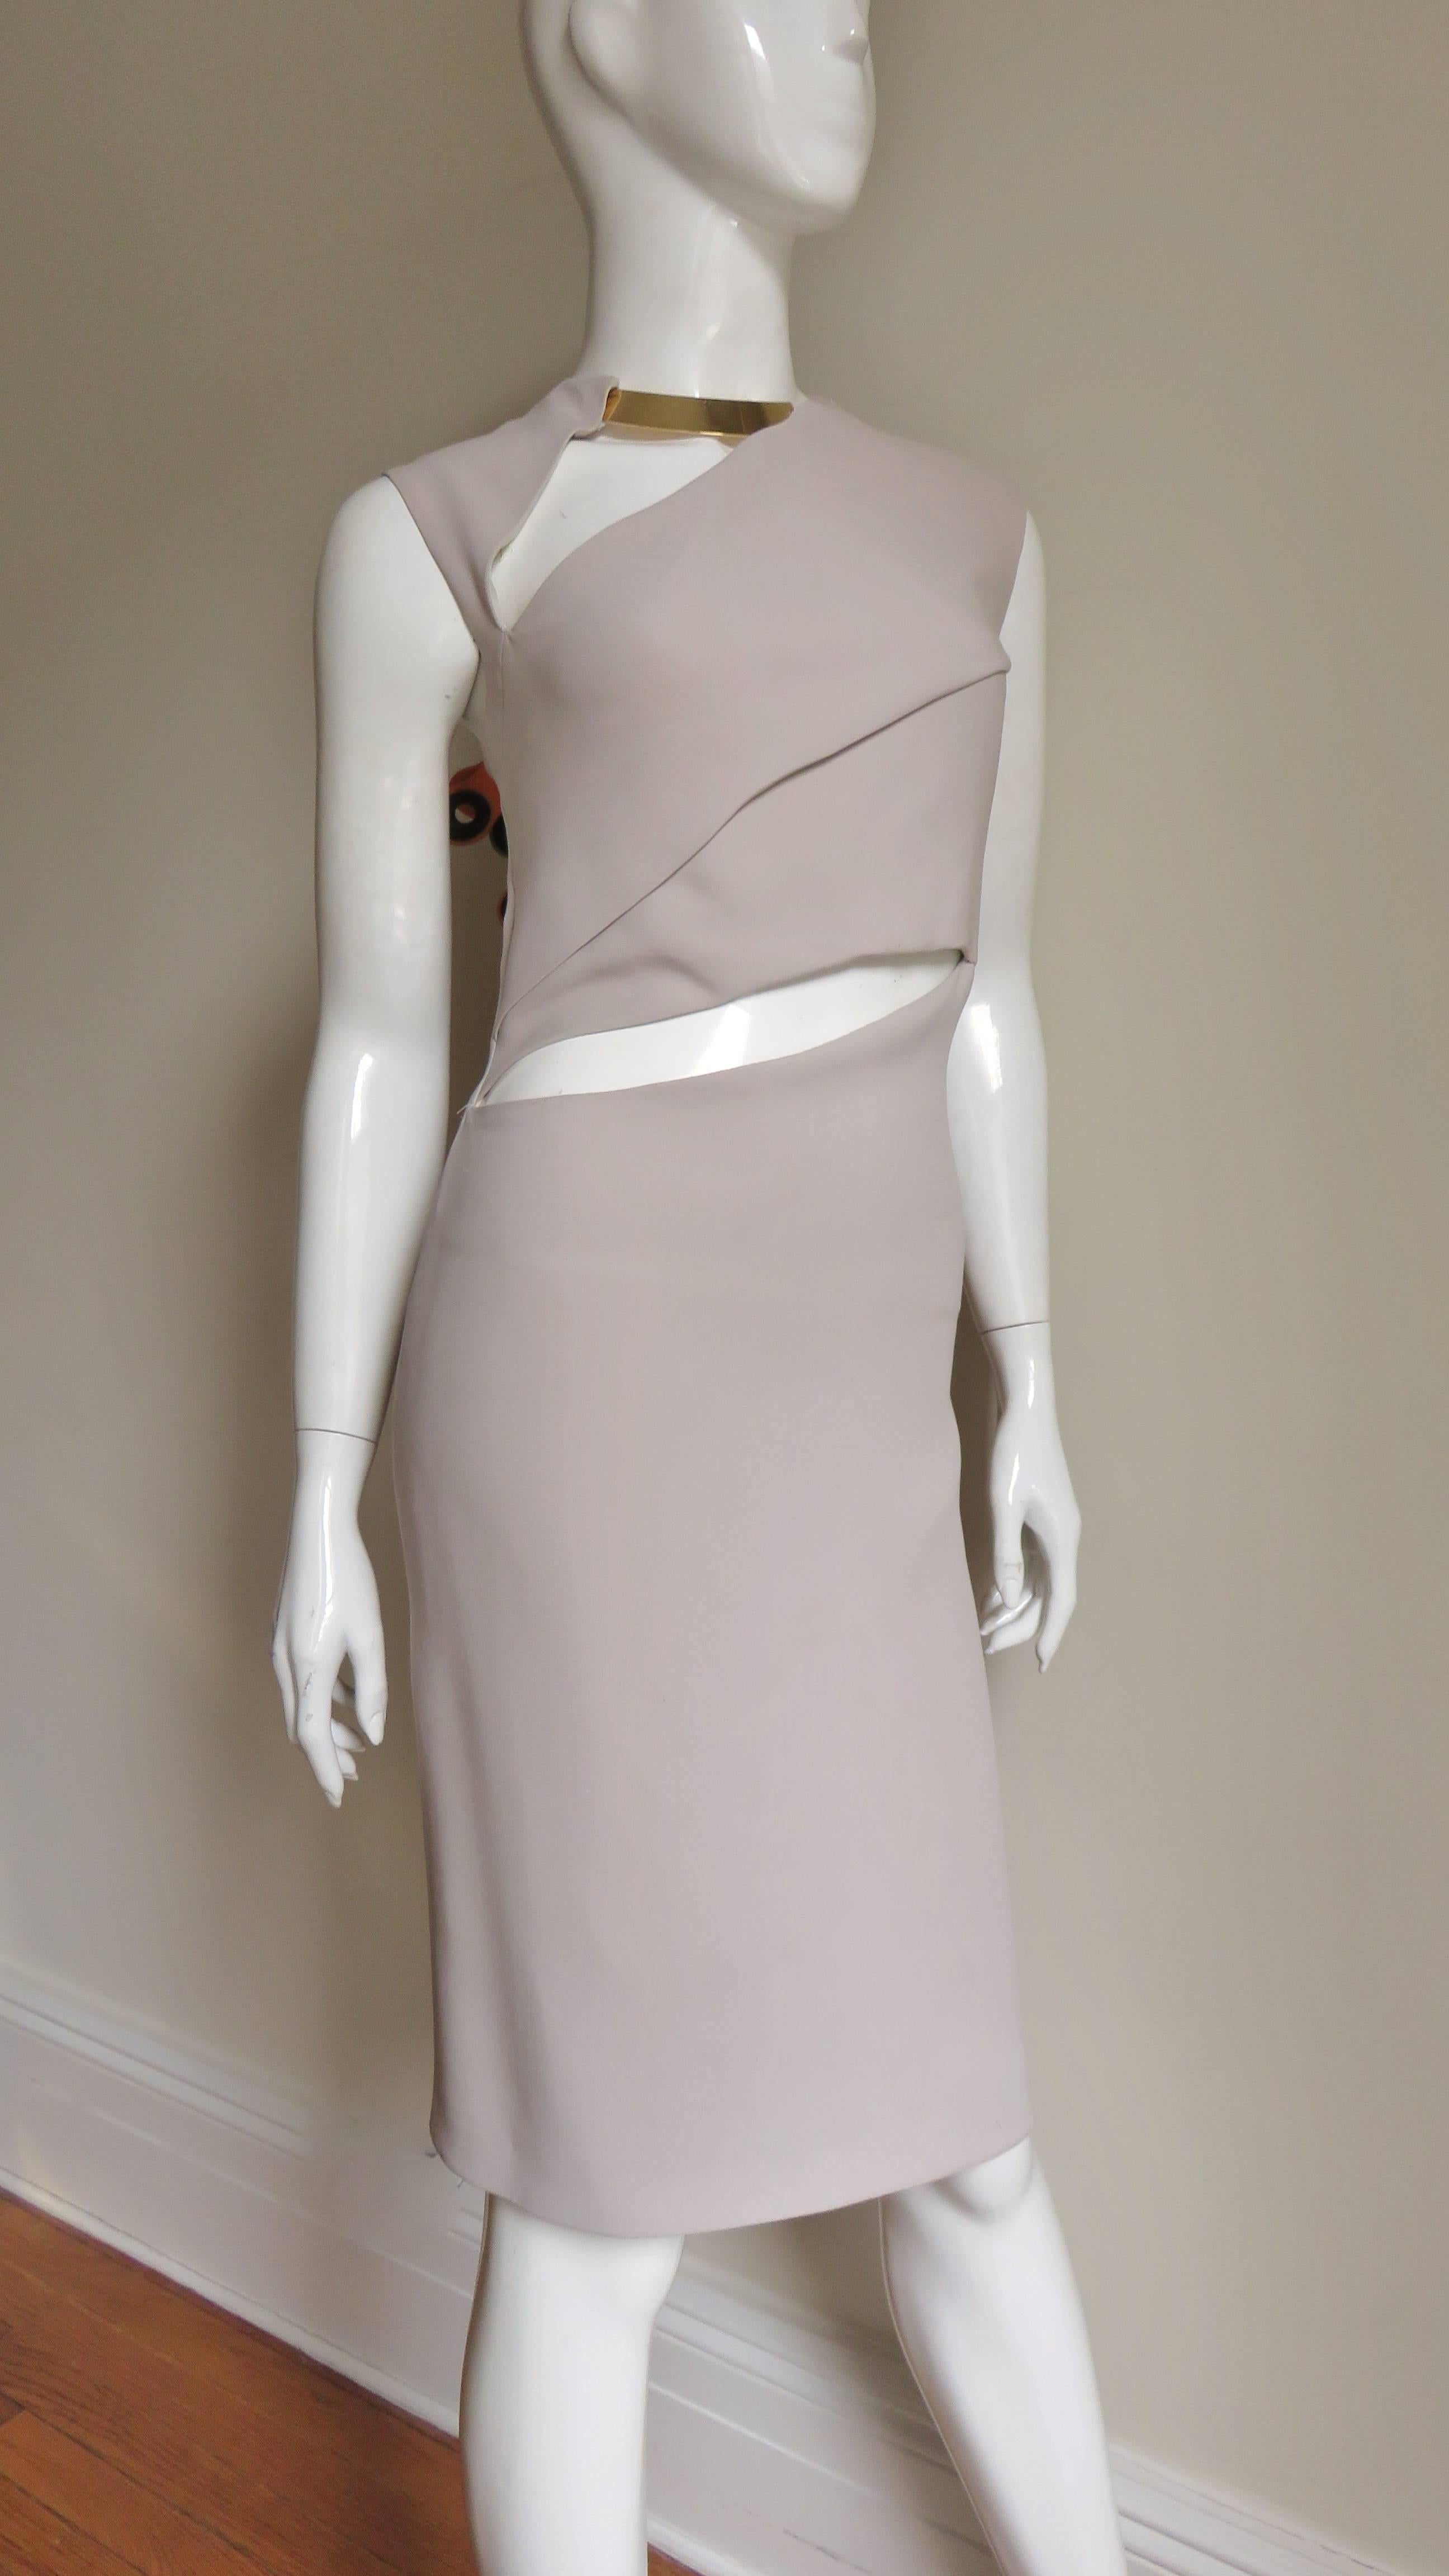 Gray Gucci Tom Ford Cut out Dress with Metal Collar